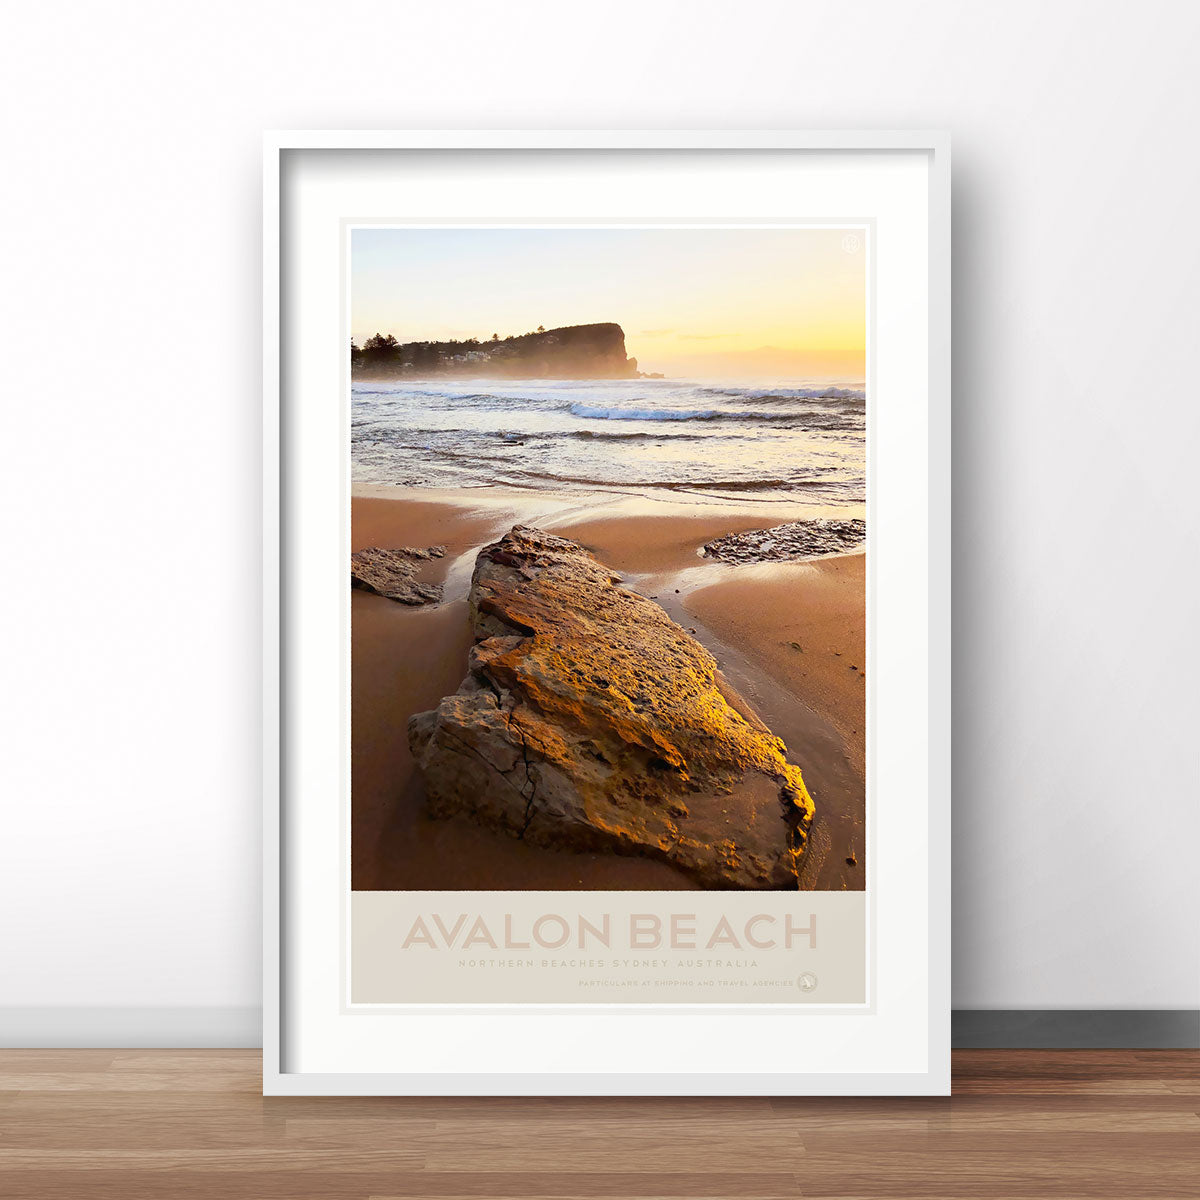 Avalon Beach vintage retro poster print from Places we Luv